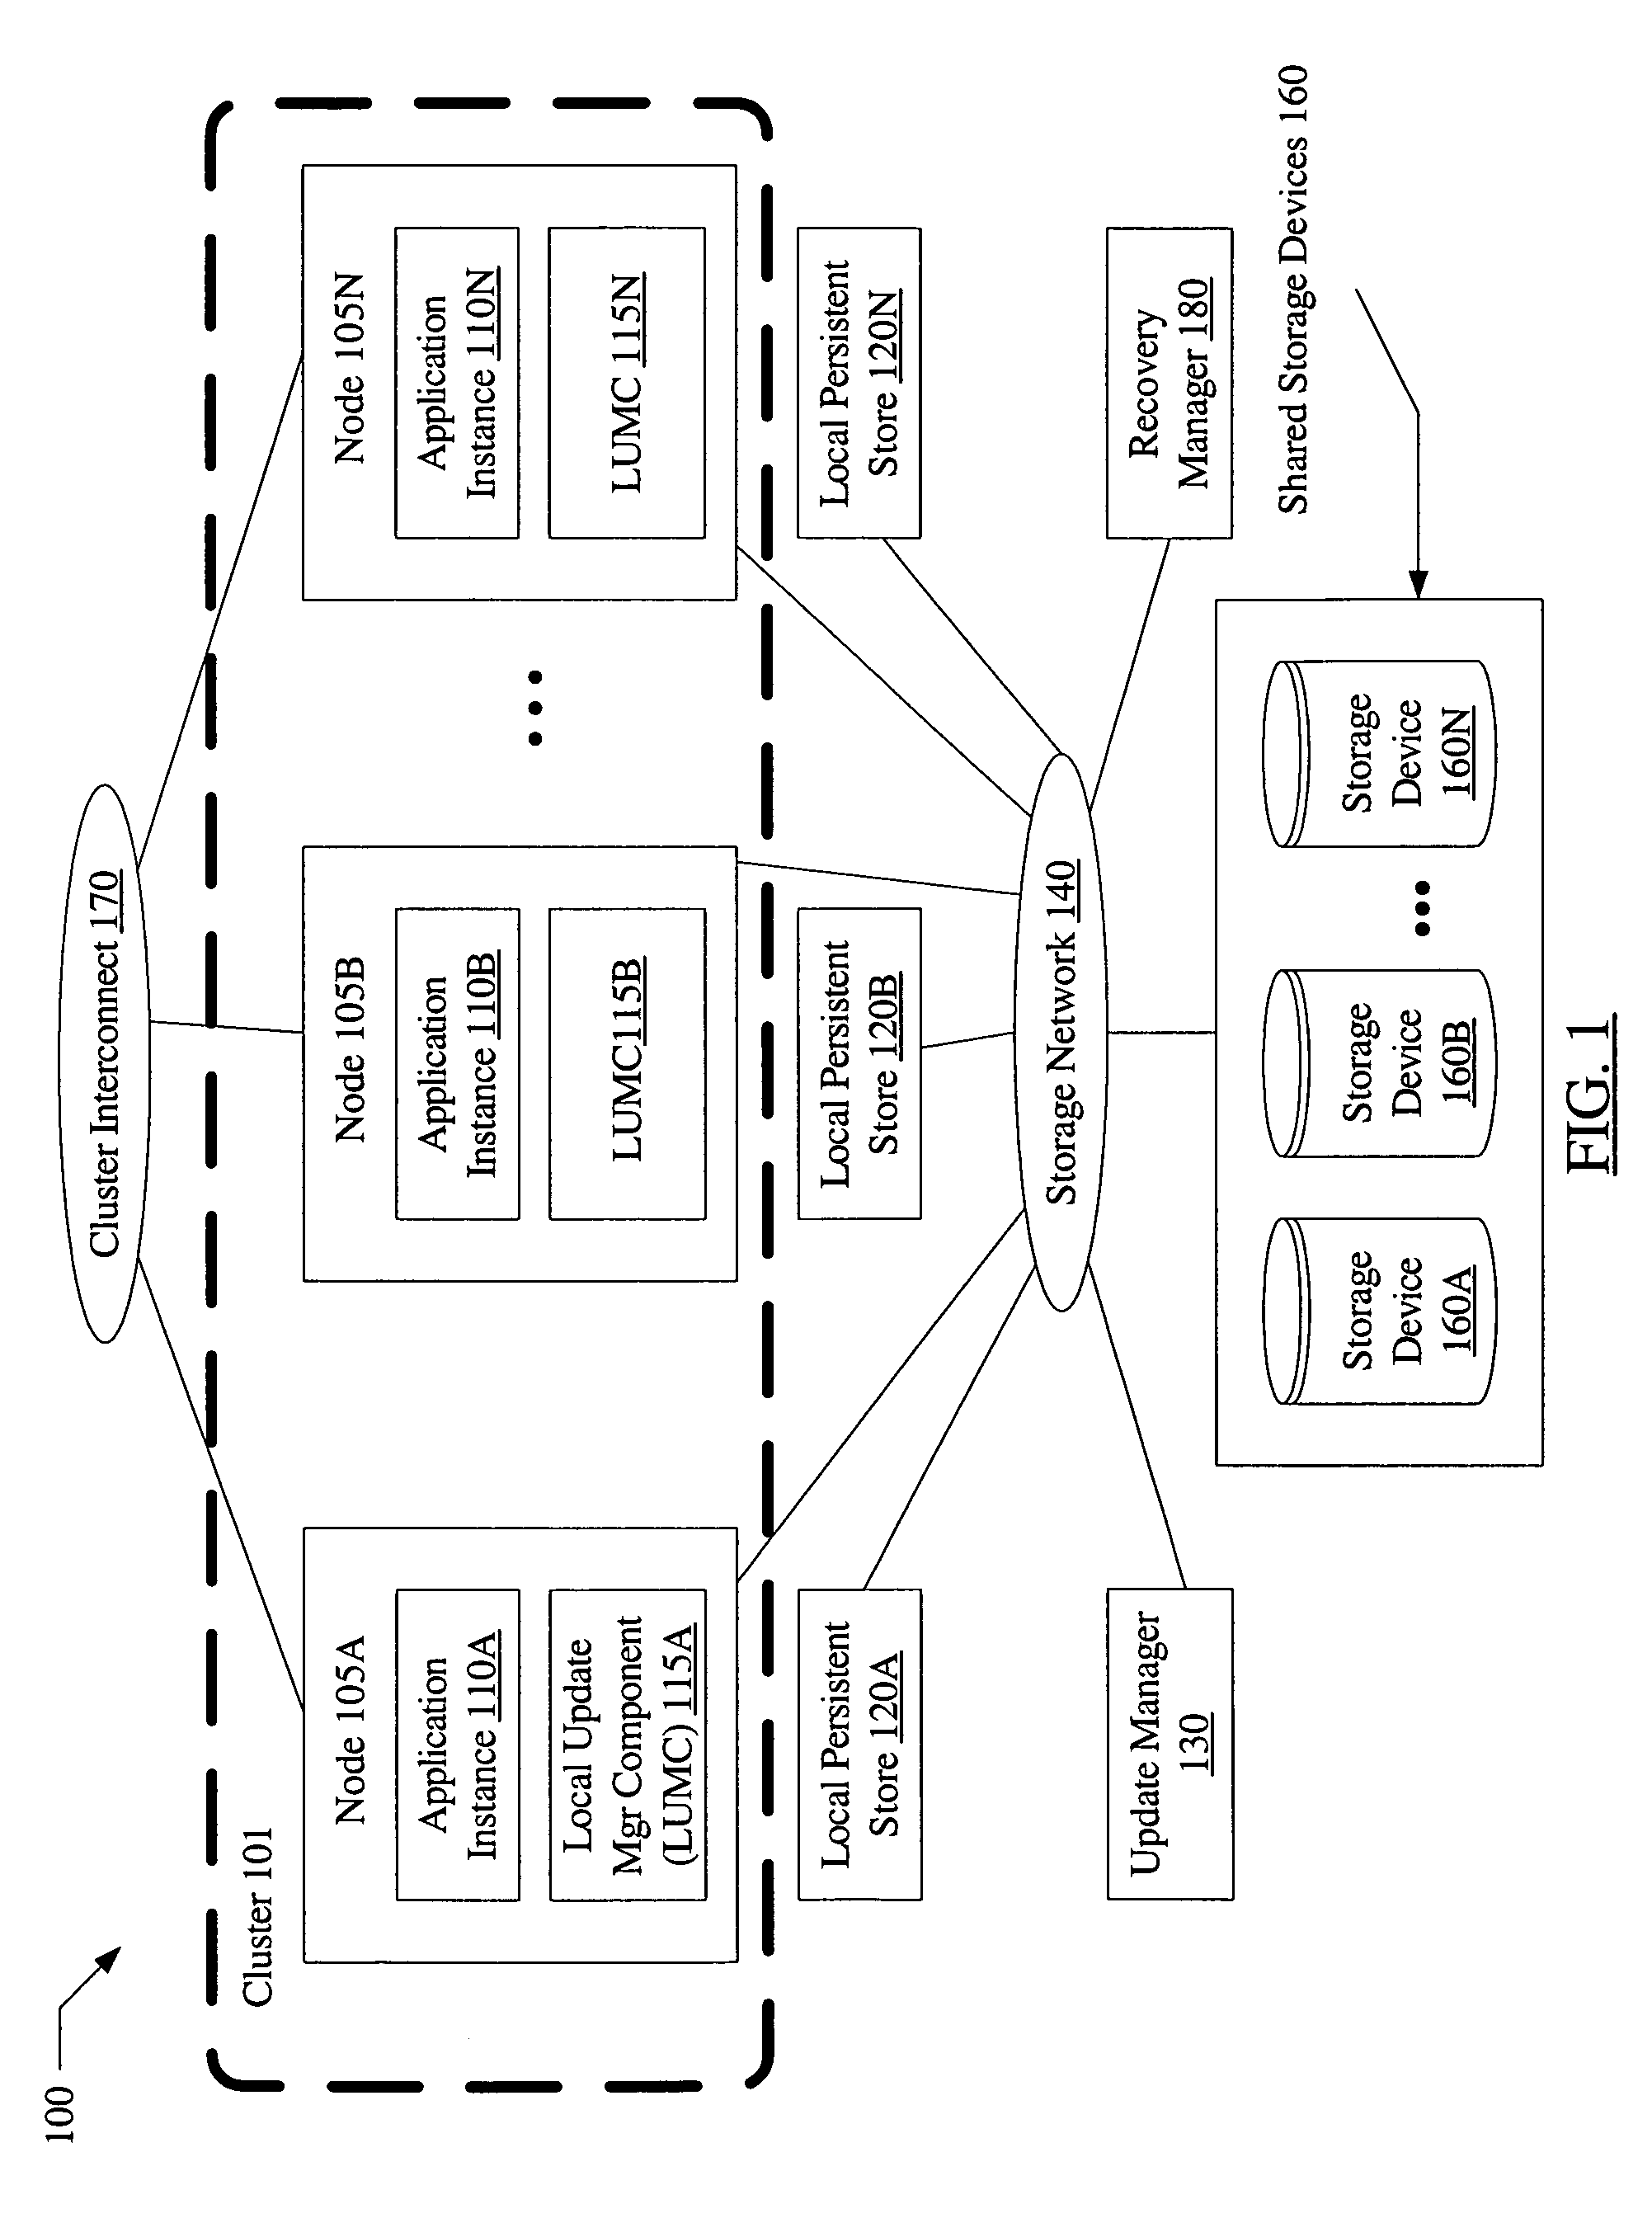 System and method to prevent data corruption due to split brain in shared data clusters